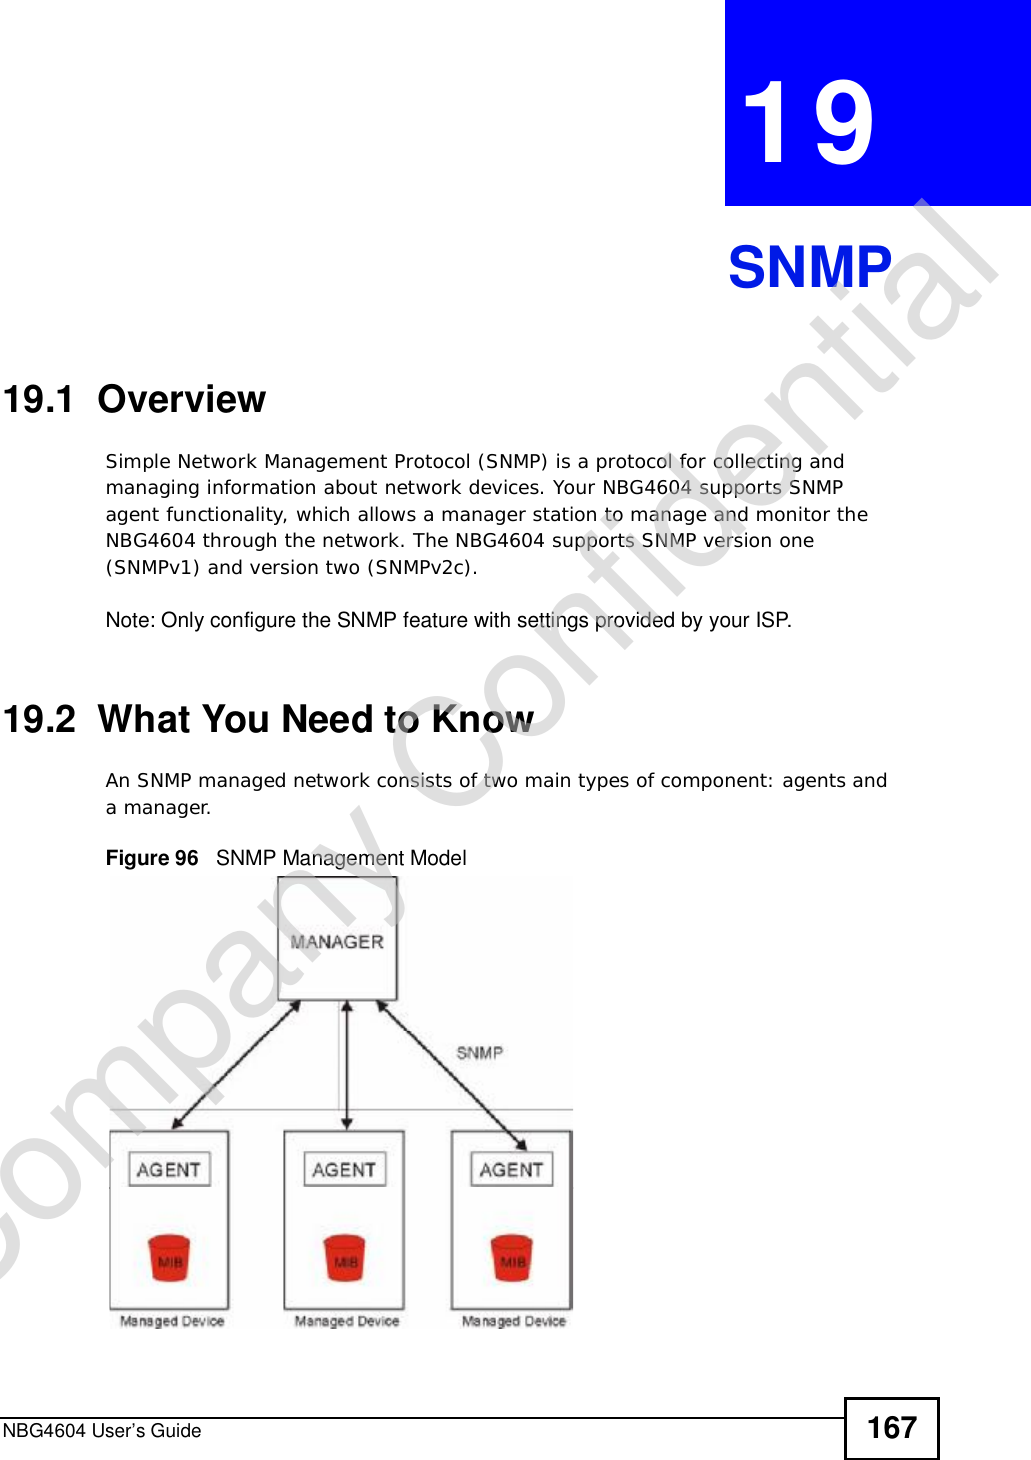 NBG4604 User’s Guide 167CHAPTER 19SNMP19.1  OverviewSimple Network Management Protocol (SNMP) is a protocol for collecting and managing information about network devices. Your NBG4604 supports SNMP agent functionality, which allows a manager station to manage and monitor the NBG4604 through the network. The NBG4604 supports SNMP version one (SNMPv1) and version two (SNMPv2c).Note: Only configure the SNMP feature with settings provided by your ISP.19.2  What You Need to KnowAn SNMP managed network consists of two main types of component: agents and a manager. Figure 96   SNMP Management ModelCompany Confidential